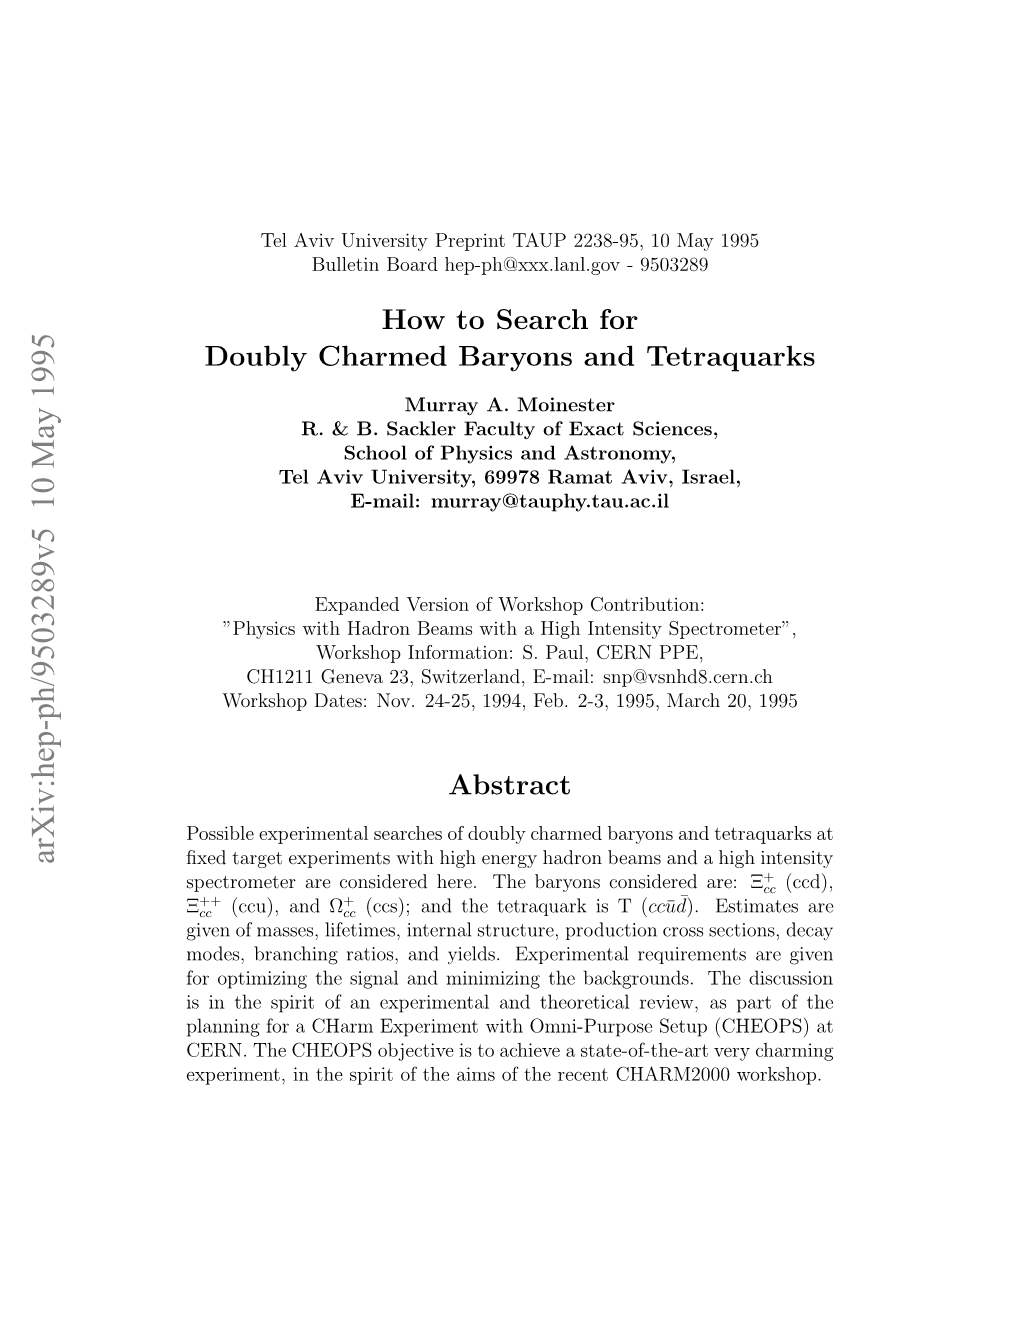 How to Search for Doubly Charmed Baryons and Tetraquarks